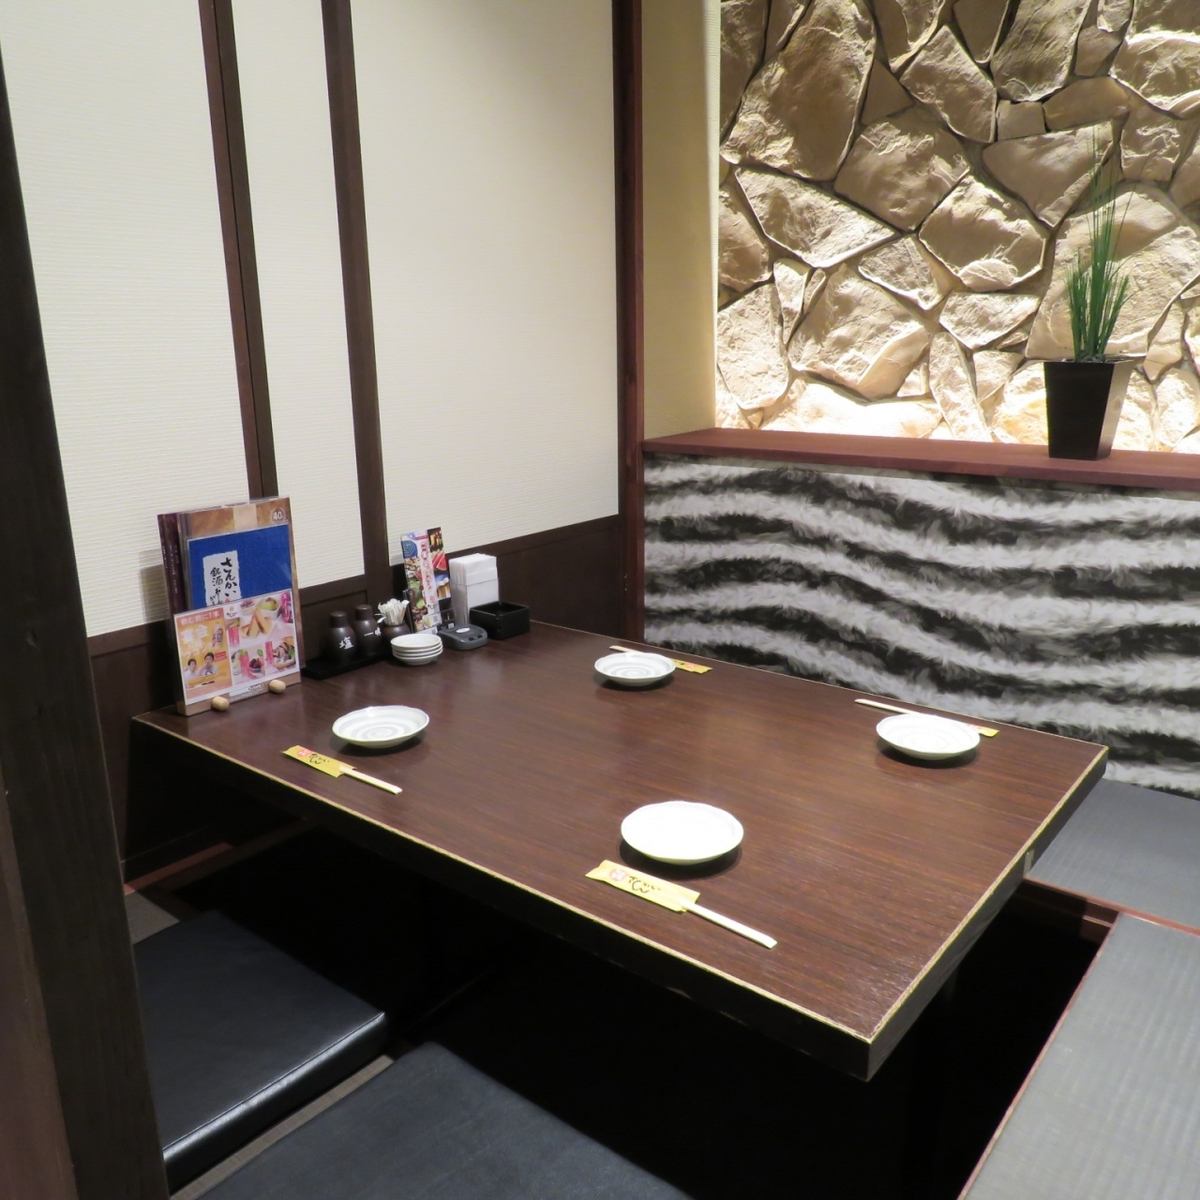 Fully equipped with private rooms with horigotatsu (horizontal kotatsu) suitable for 2 to 2 people!